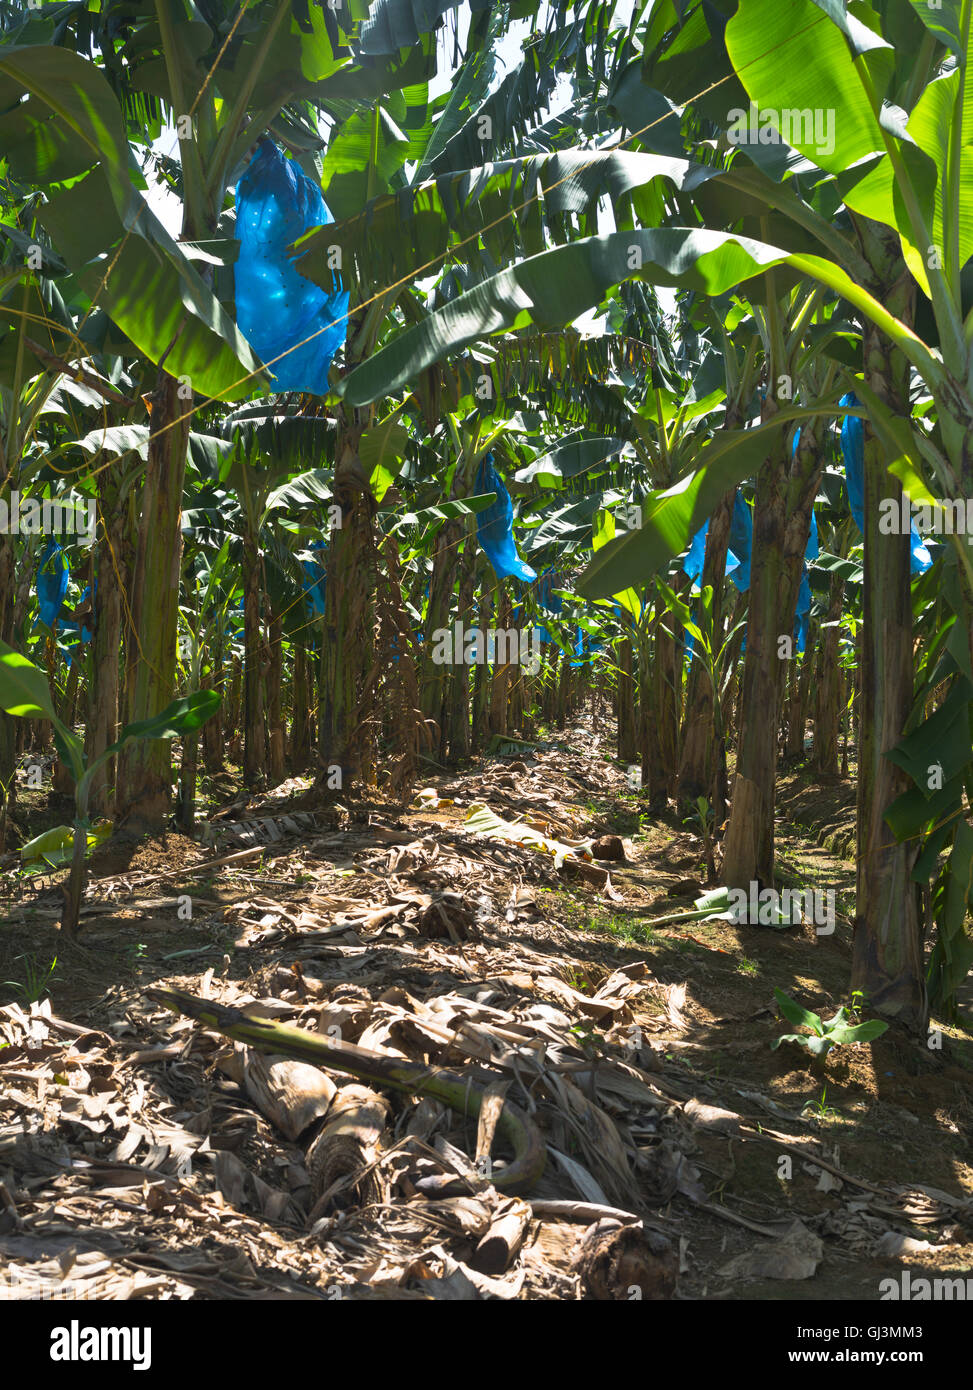 dh Roseau valley plantation ST LUCIA CARIBBEAN Blue plastic bags protecting bunches of bananas farm banana agriculture field Stock Photo